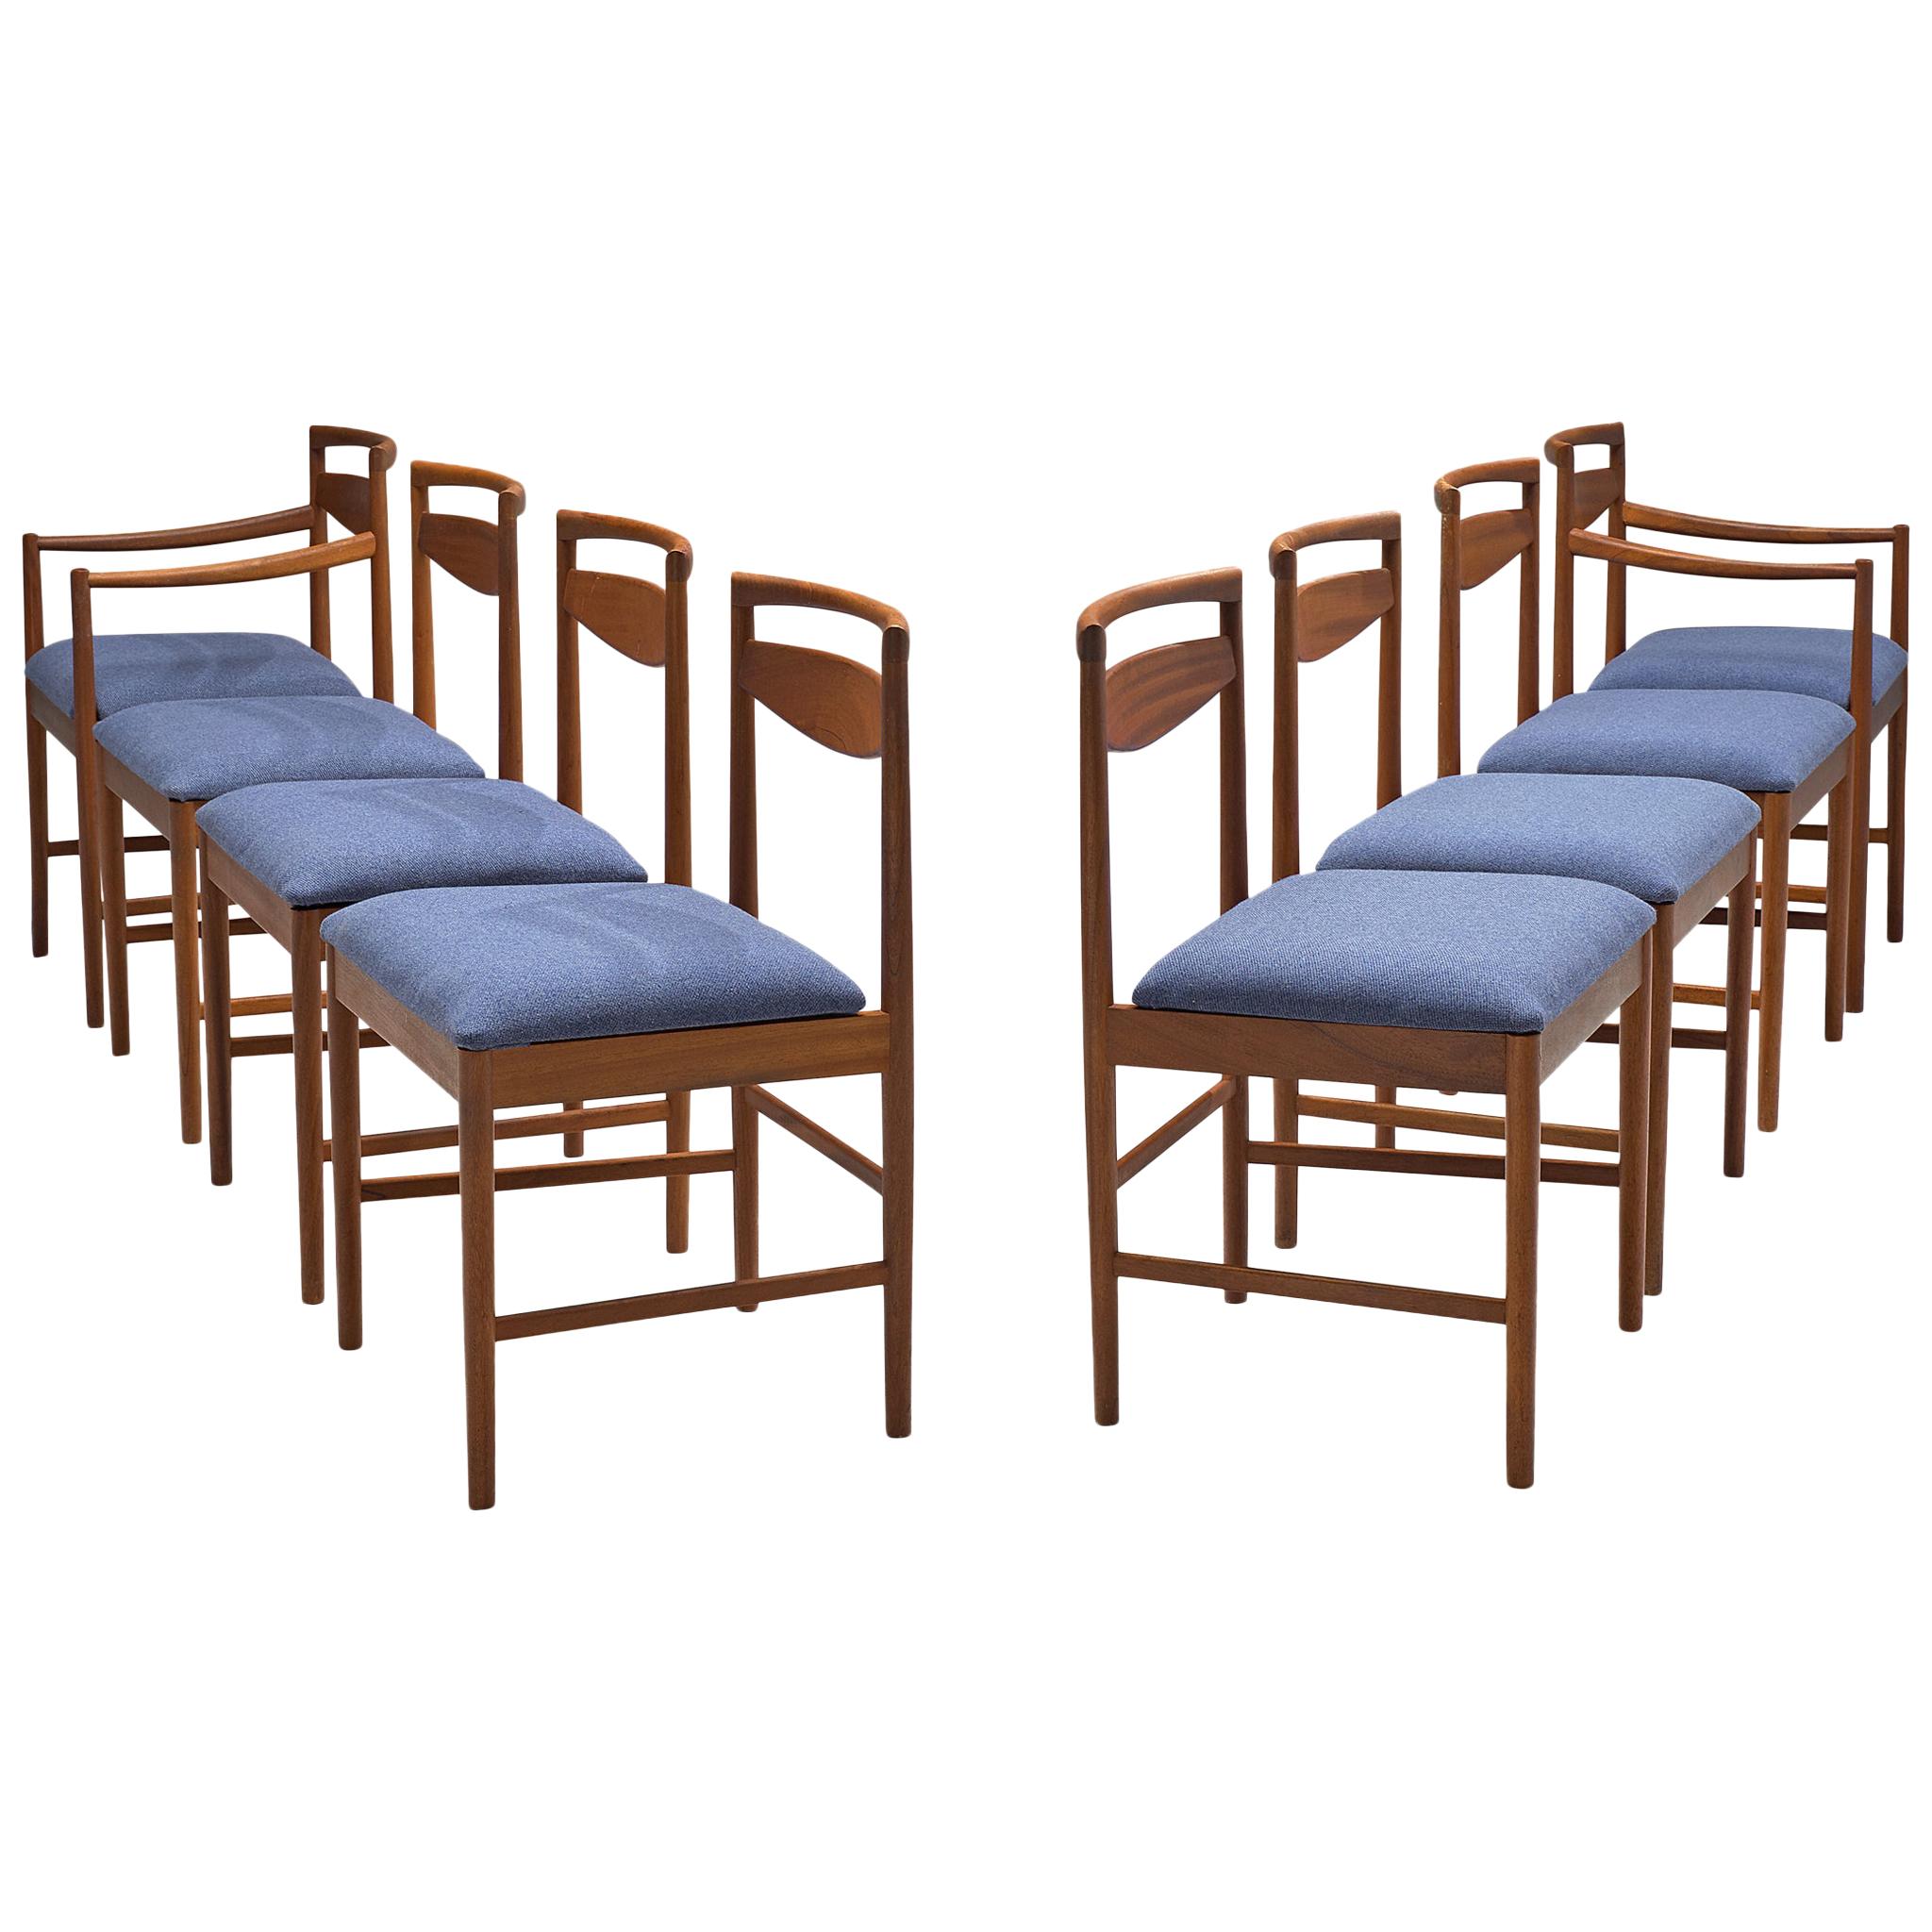 Danish Set of Eight Chairs in Teak and Blue Upholstery